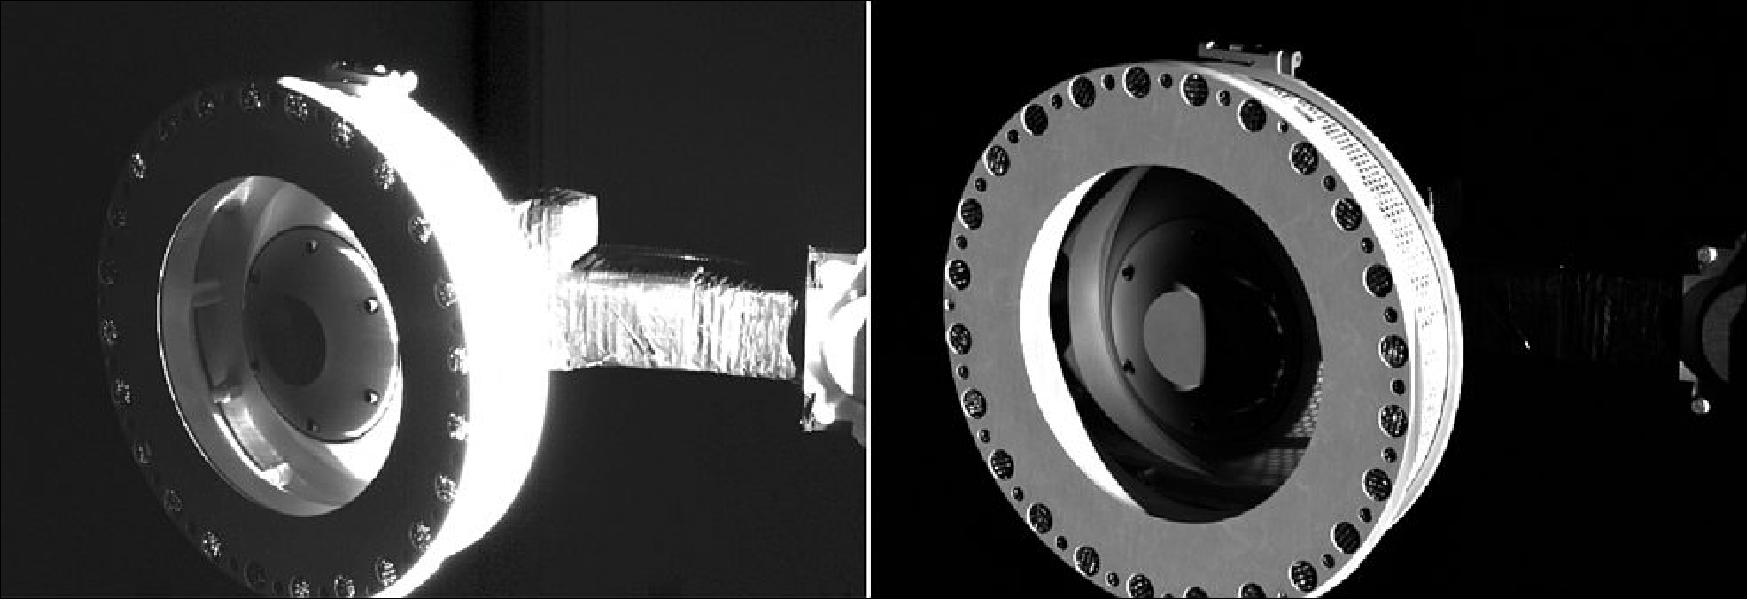 Figure 27: These images show the OSIRIS-REx Touch-and-Go Sample Acquisition Mechanism (TAGSAM) sampling head extended from the spacecraft at the end of the TAGSAM arm. The spacecraft’s SamCam camera captured the images on Nov. 14, 2018 as part of a visual checkout of the TAGSAM system, which was developed by Lockheed Martin Space to acquire a sample of asteroid material in a low-gravity environment. The imaging was a rehearsal for a series of observations that will be taken at Bennu directly after sample collection (image credits: NASA/Goddard/University of Arizona)